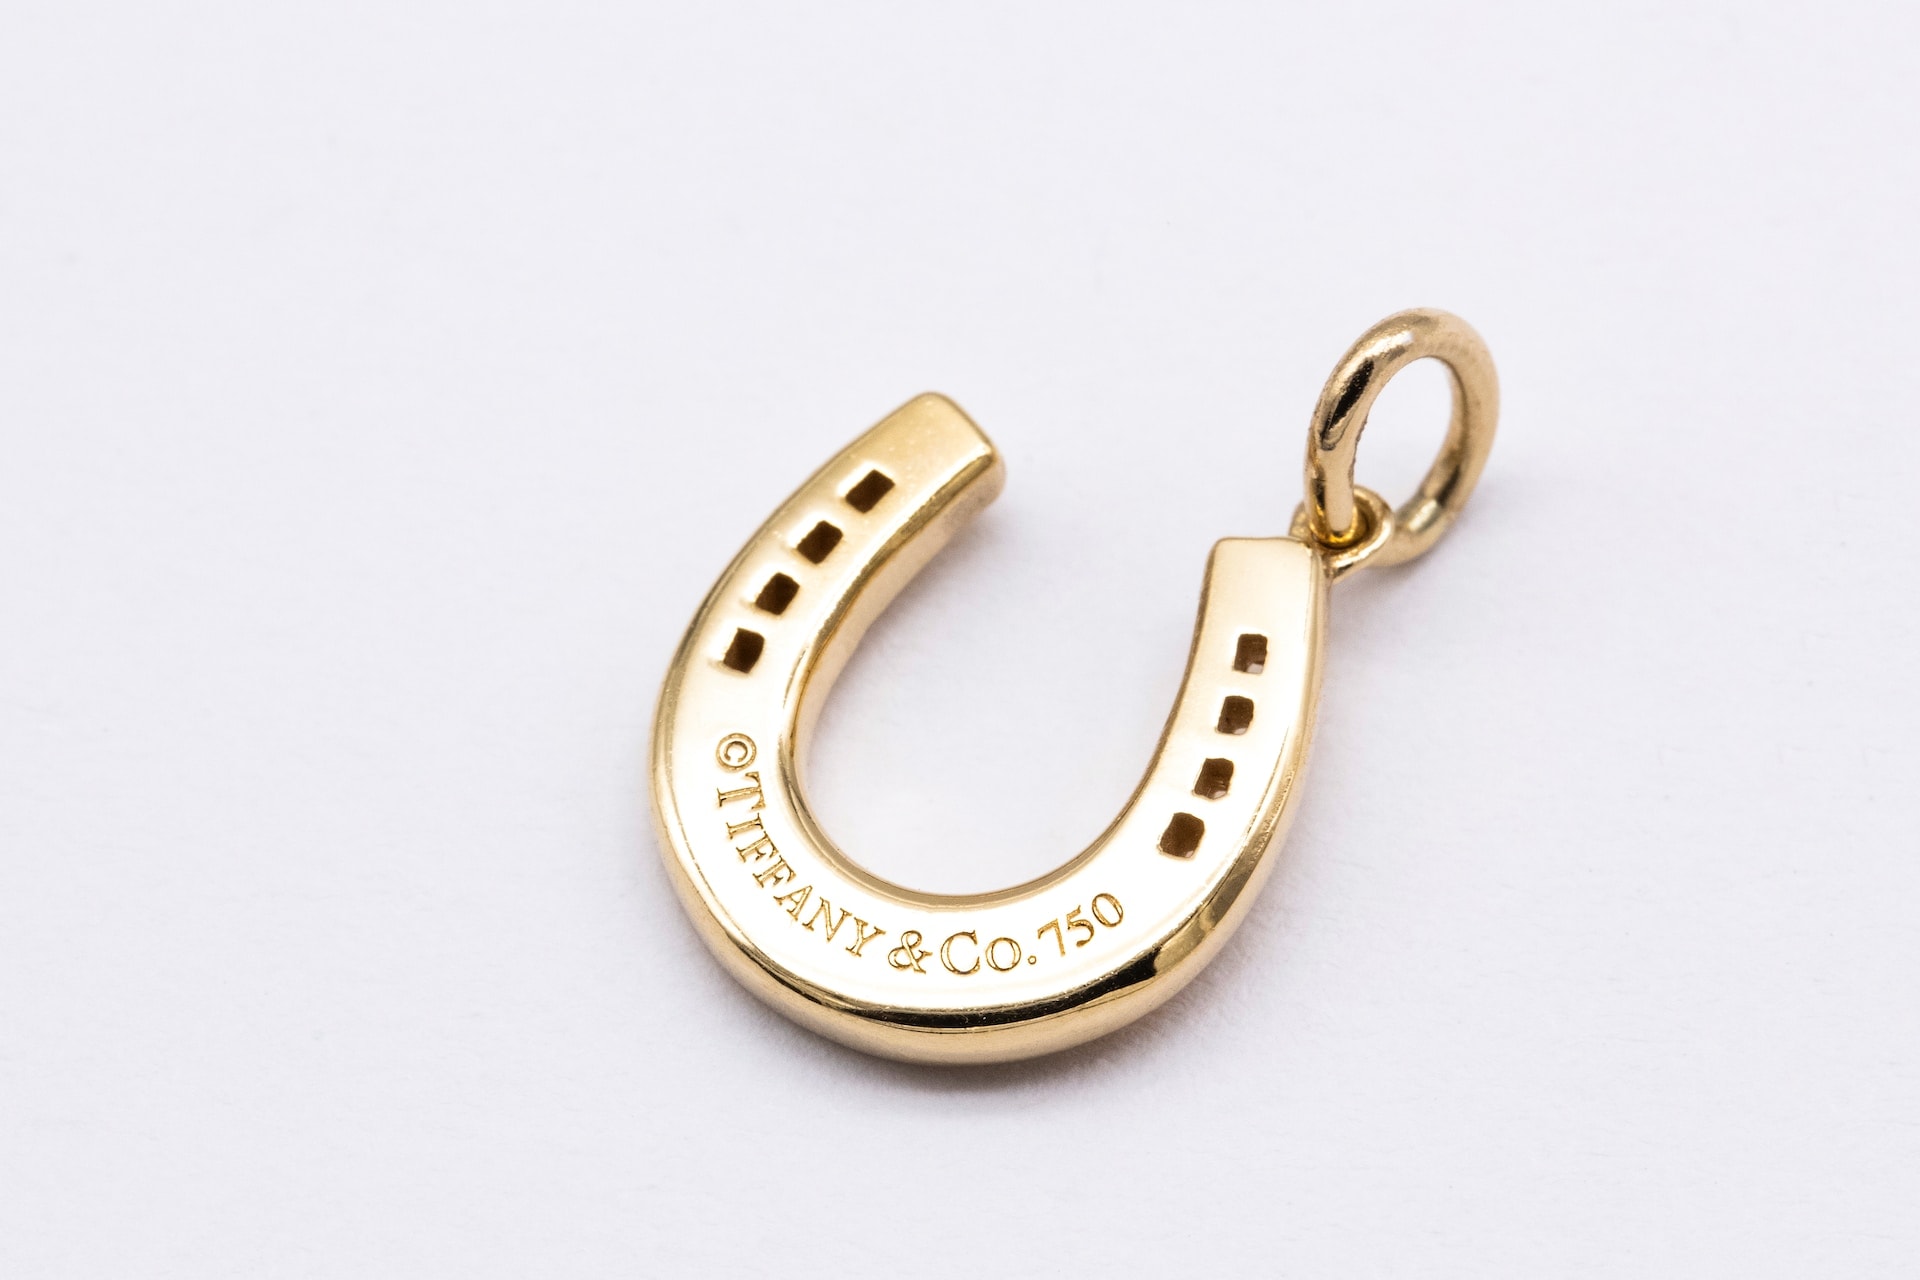 horseshoe symbol in jewelry meaning